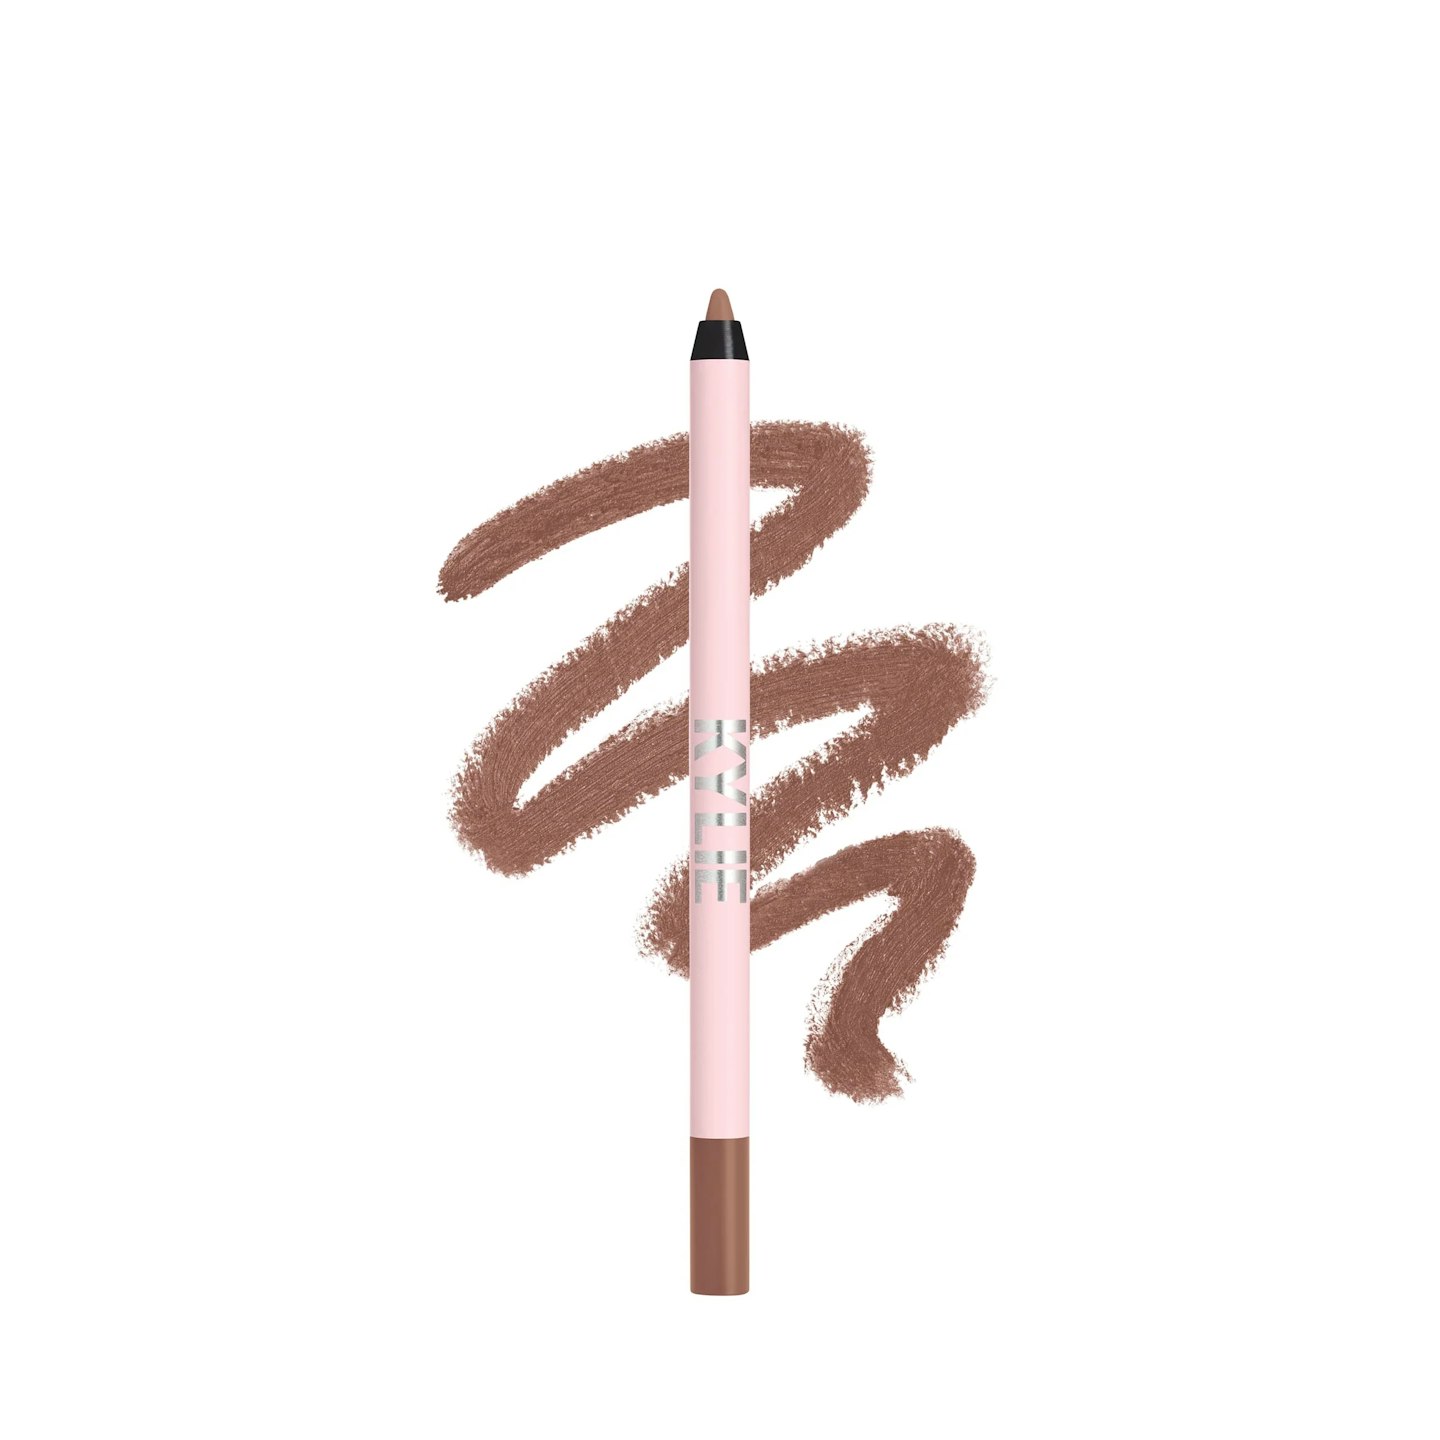 Kylie by Kylie Jenner Lip Liner in Iced Latte